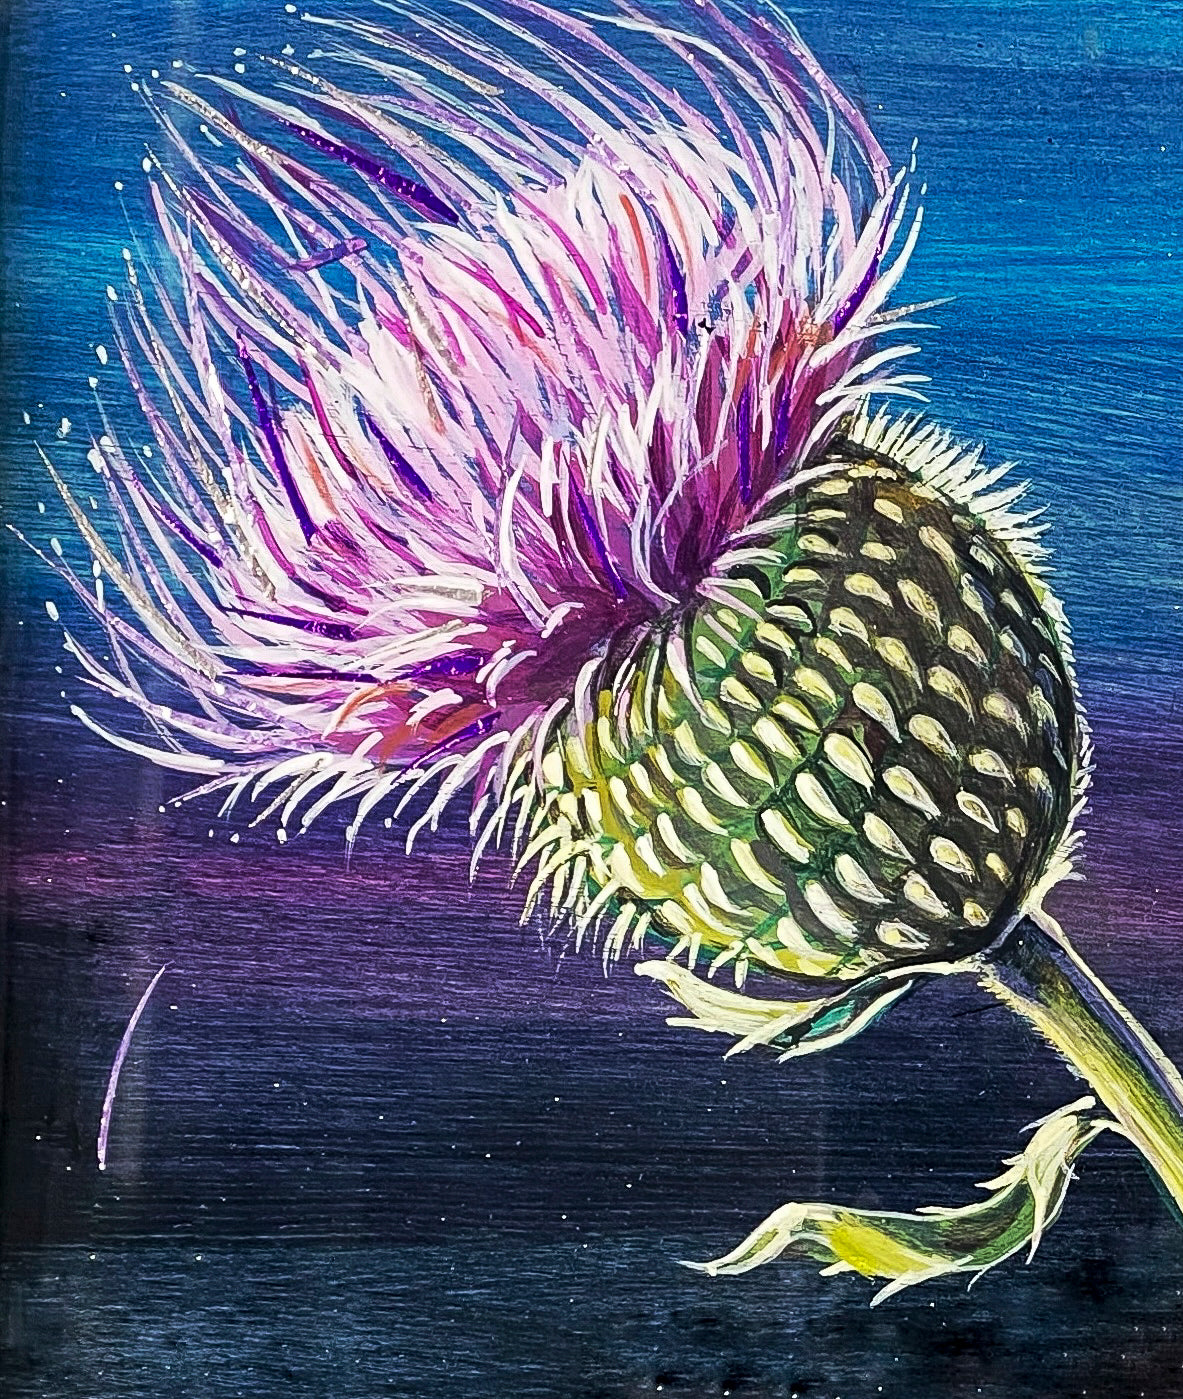 Closeup of painted thistle on larger painting of colorful yellow and black Goldfinch perched on the stem of a thistle shaking its pollen against a lilac and navy metallic background; artist Marie Lavallee